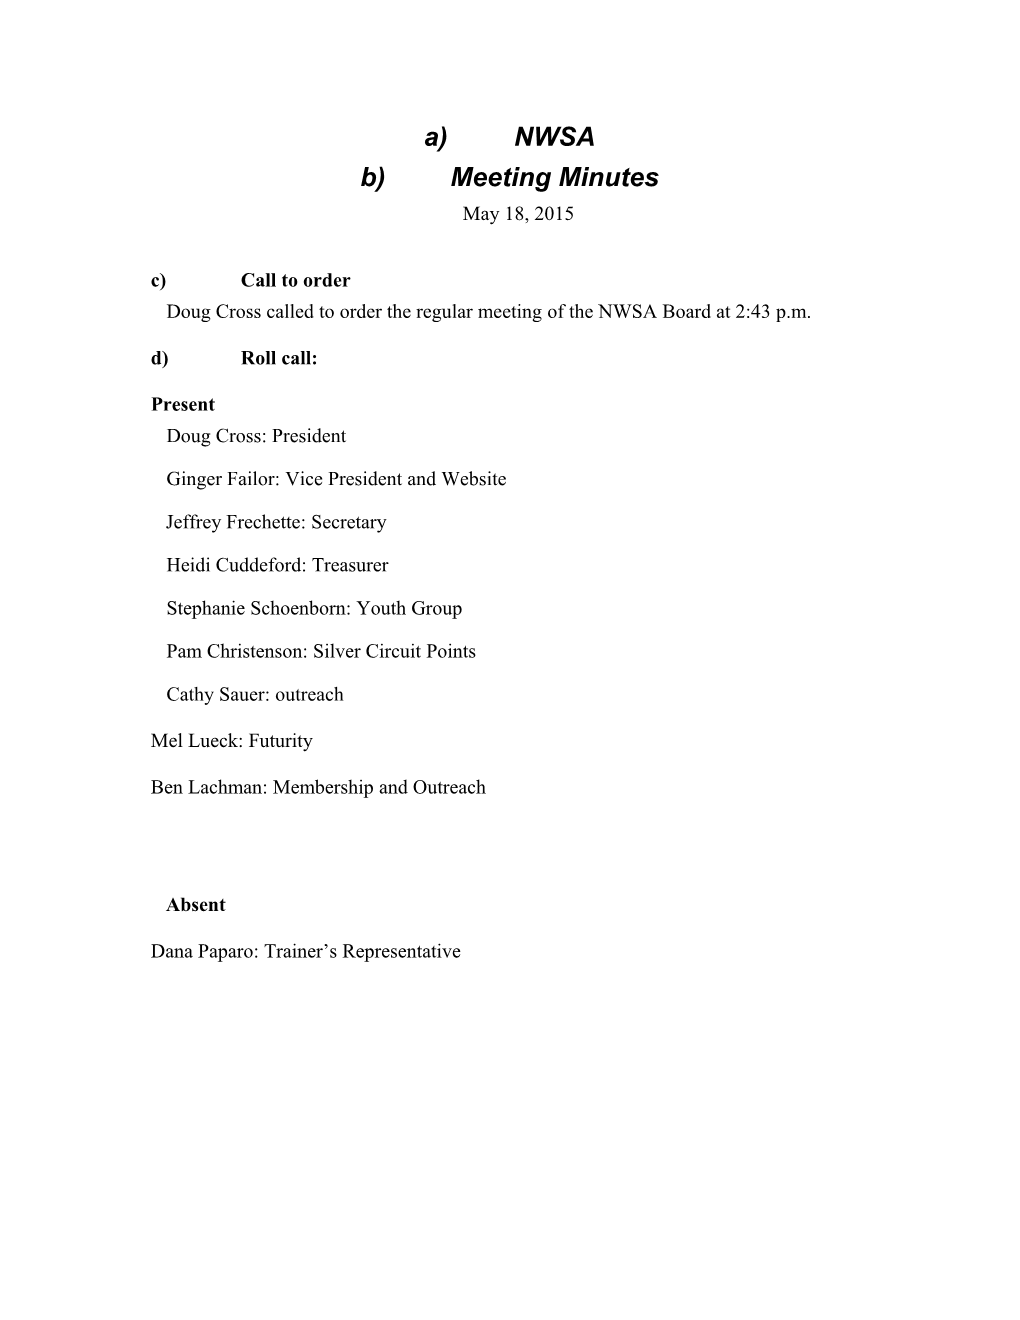 Formal Meeting Minutes s3